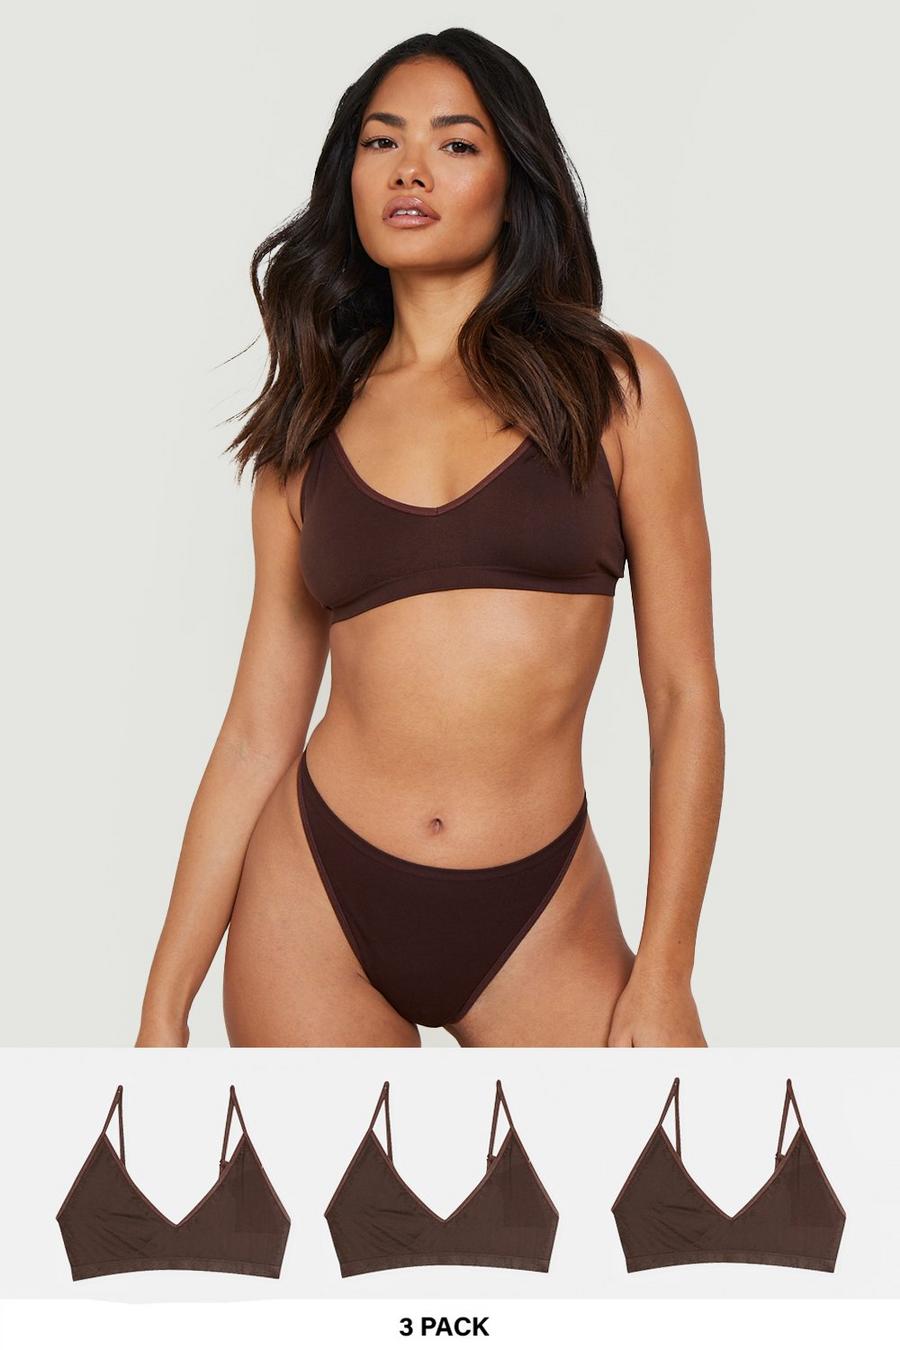 Chocolate brown 3 Pack Seamfree Triangle Bralette